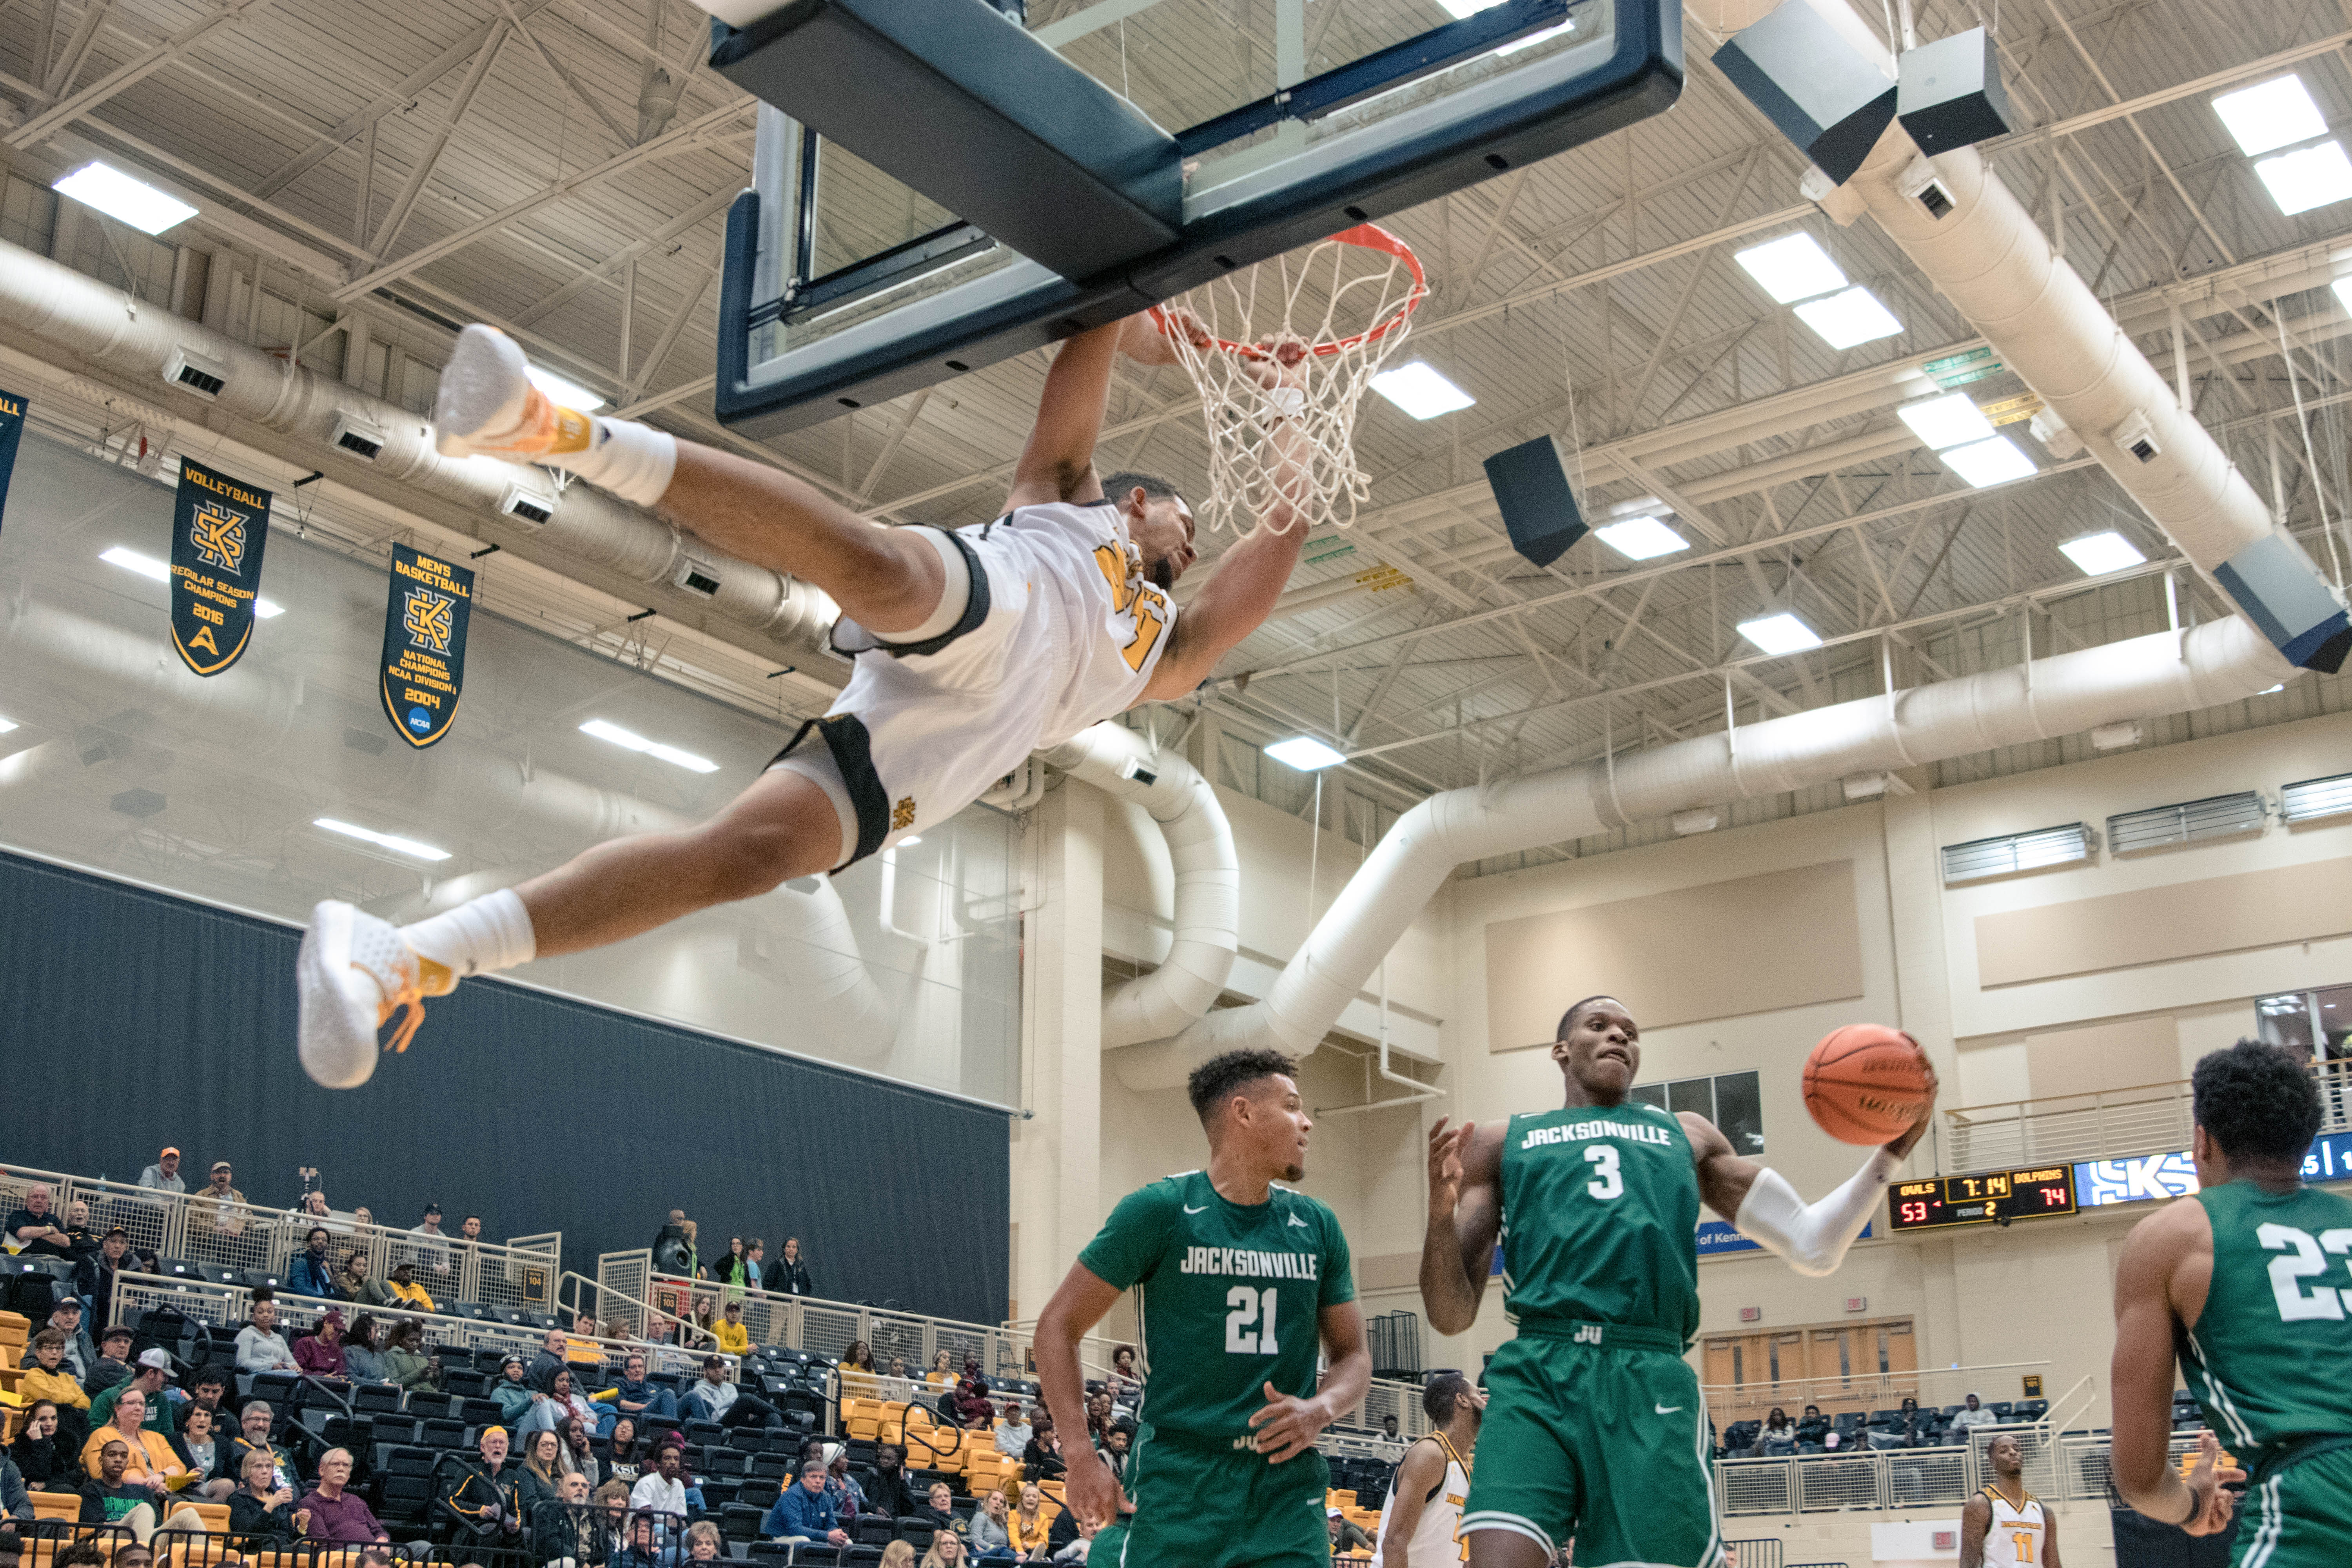 Three Owls combine for 55 points in ASUN home opener loss to Jacksonville